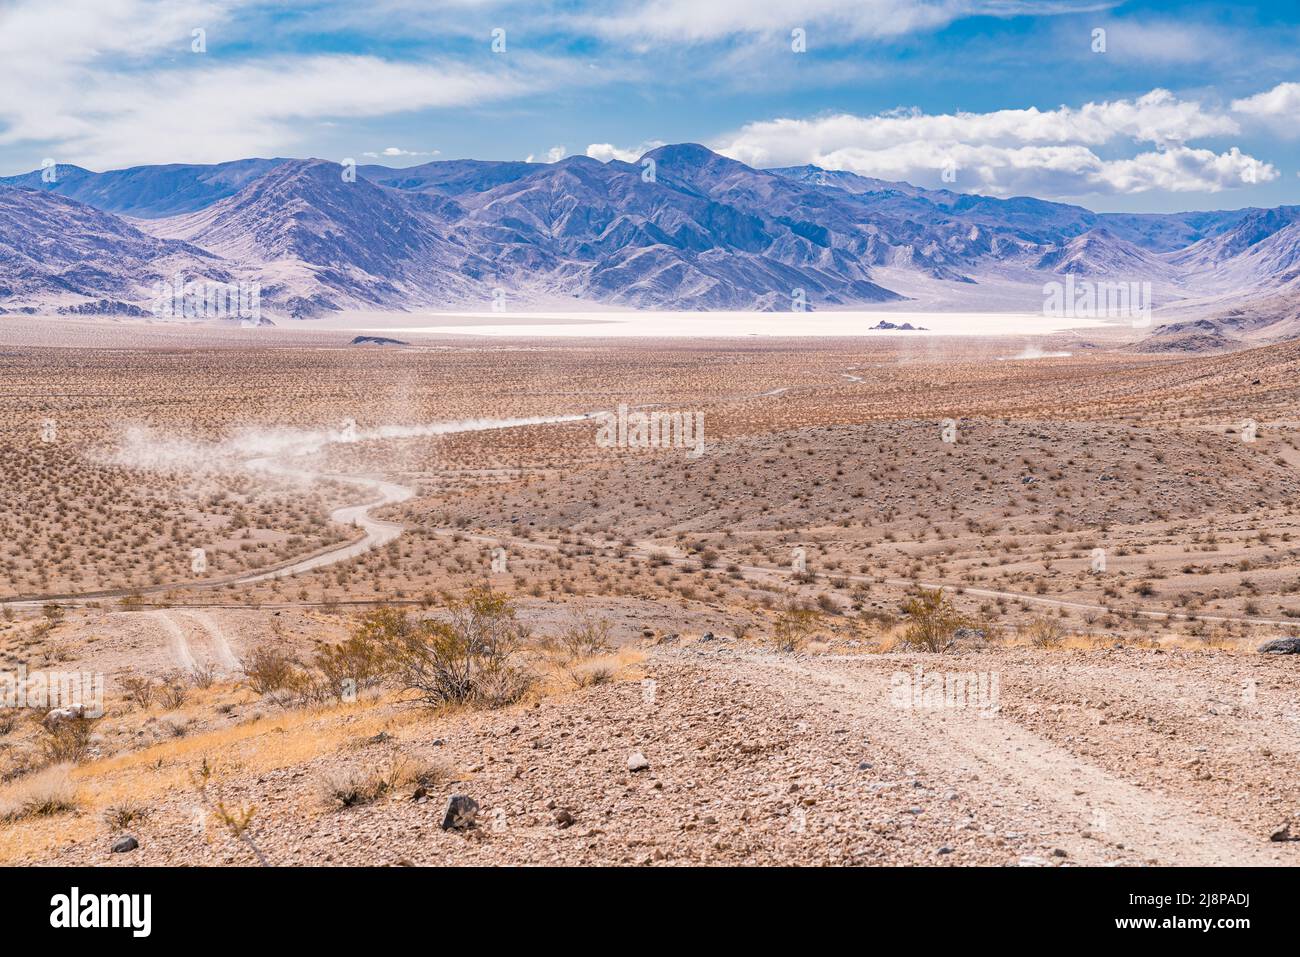 Vehicles travel down the gravel road towards the Racetrack Playa in Death Valley National Park Stock Photo